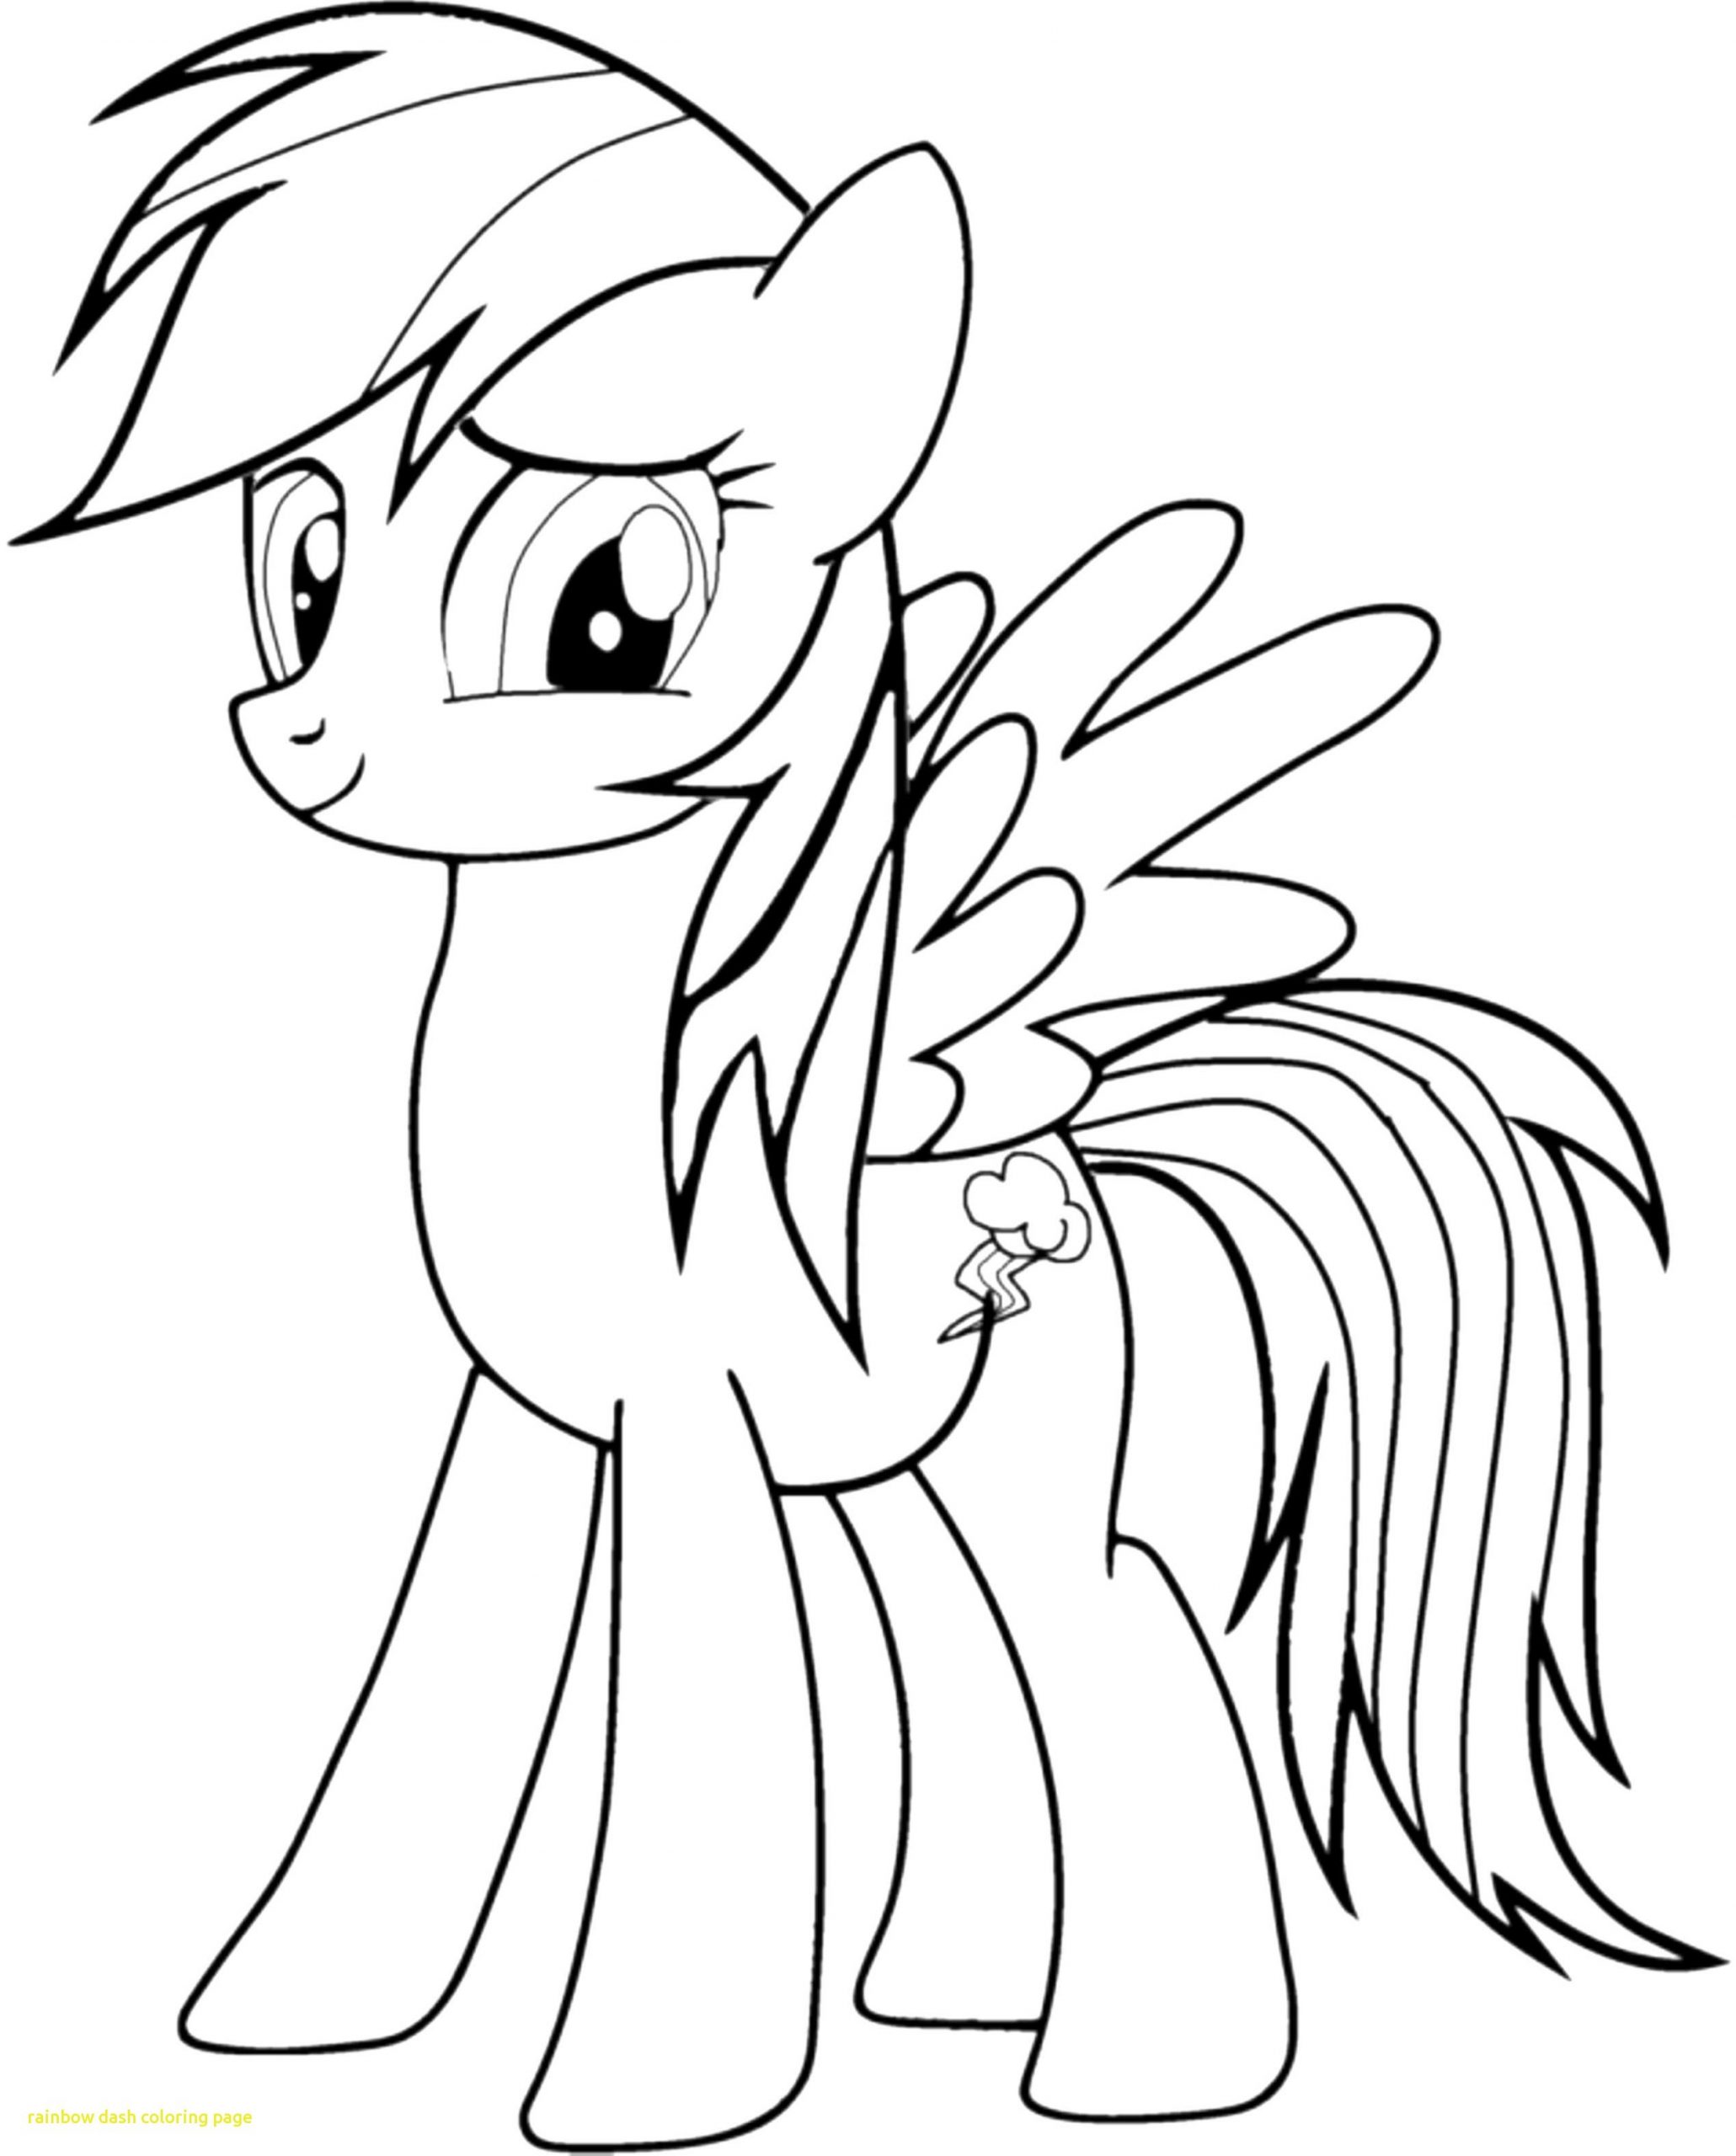 coloring : Applejack Coloring Page My Little Pony Applejack Colouring Pages‚  My Little Pony Equestria Girl Coloring Pages Applejack‚ Applejack Colouring  Page plus colorings